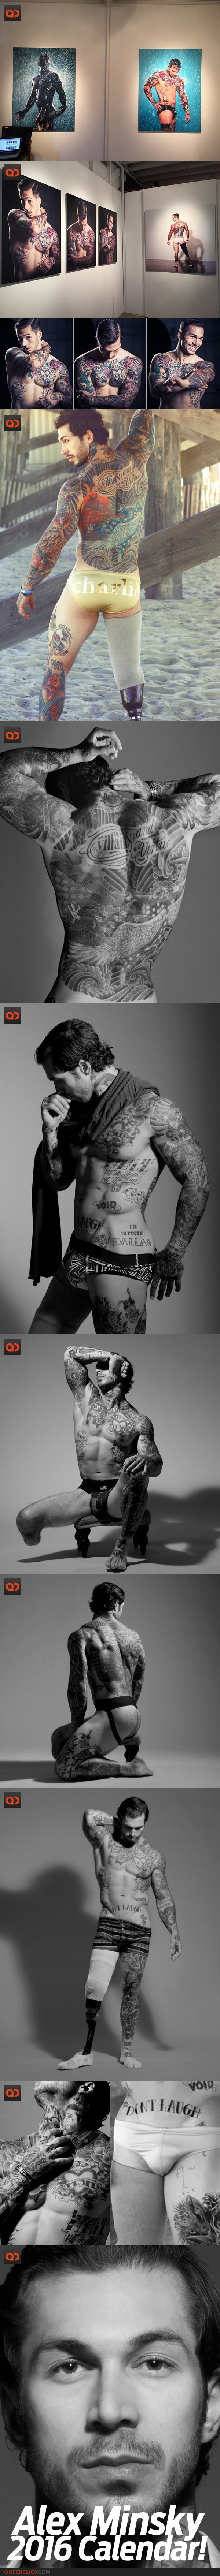 Alex Minsky Is Determined To Make Your 2016 A Memorable Year With His Sexy Calendar